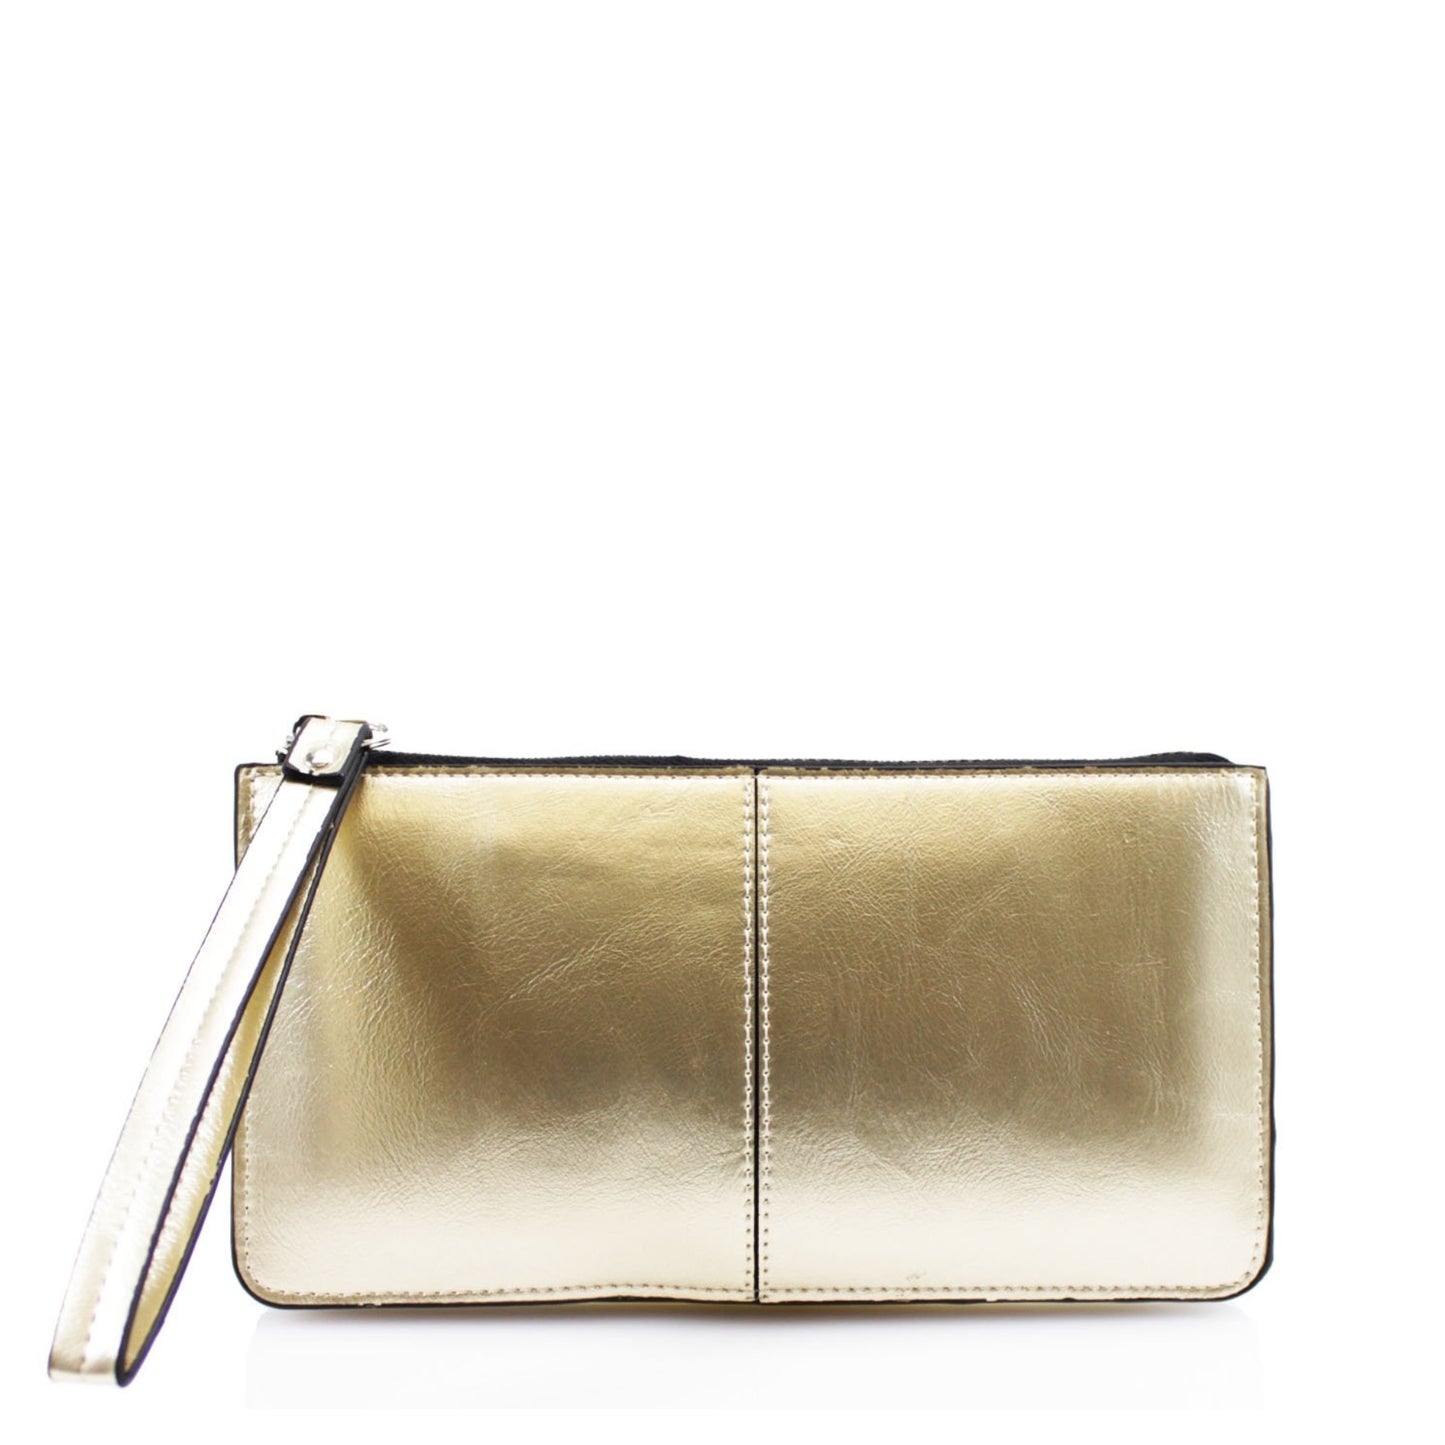 Small clutch bag with wrist strap - gold